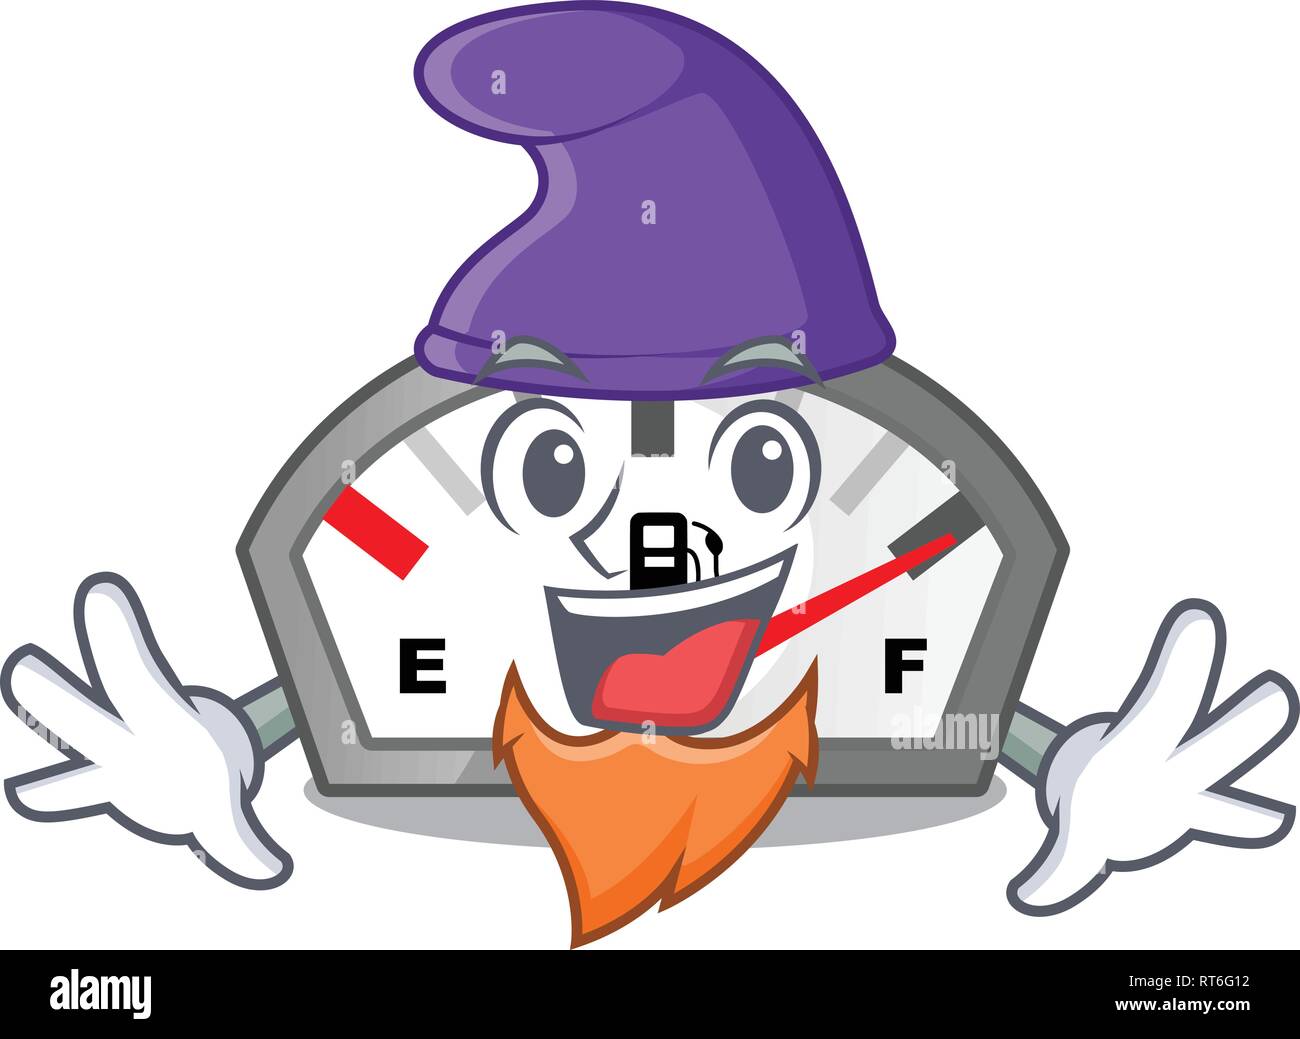 Elf gasoline indicator in the character shape Stock Vector